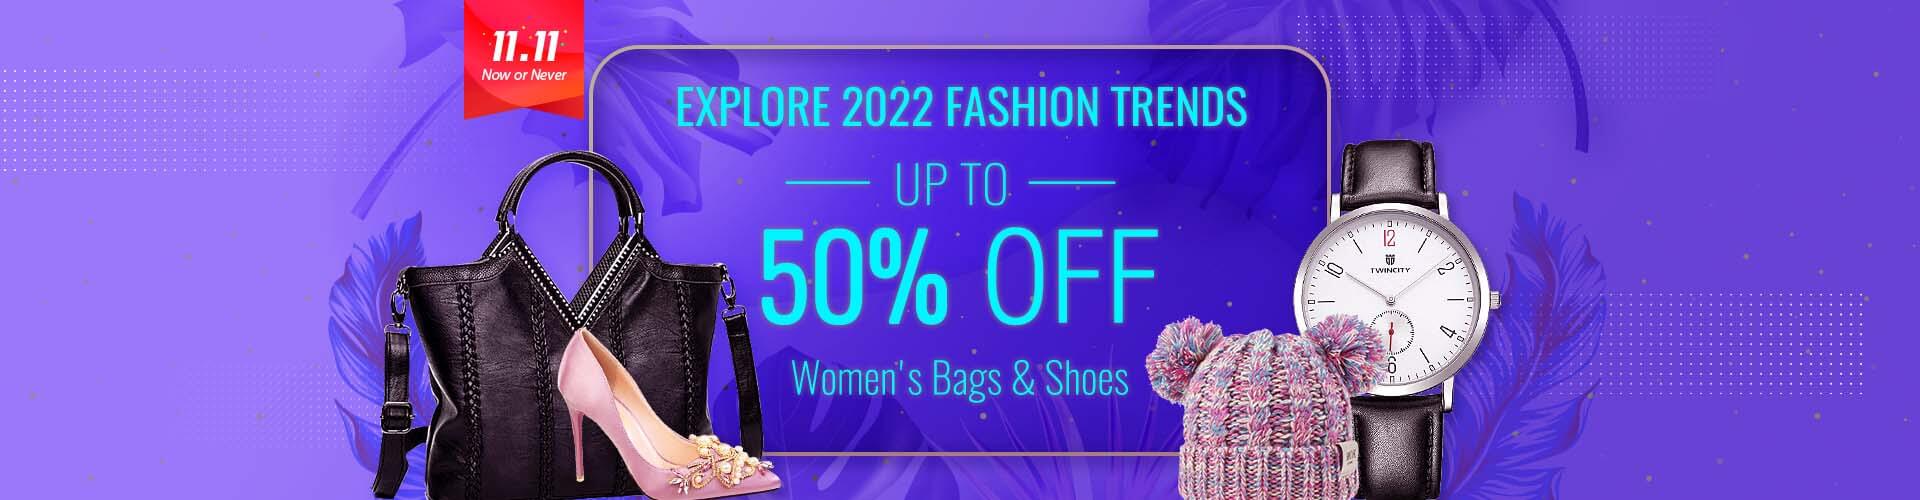 DHgate Women's Bags & Shoes, Explore 2022 Fashion Trends, UP TO 50% OFF